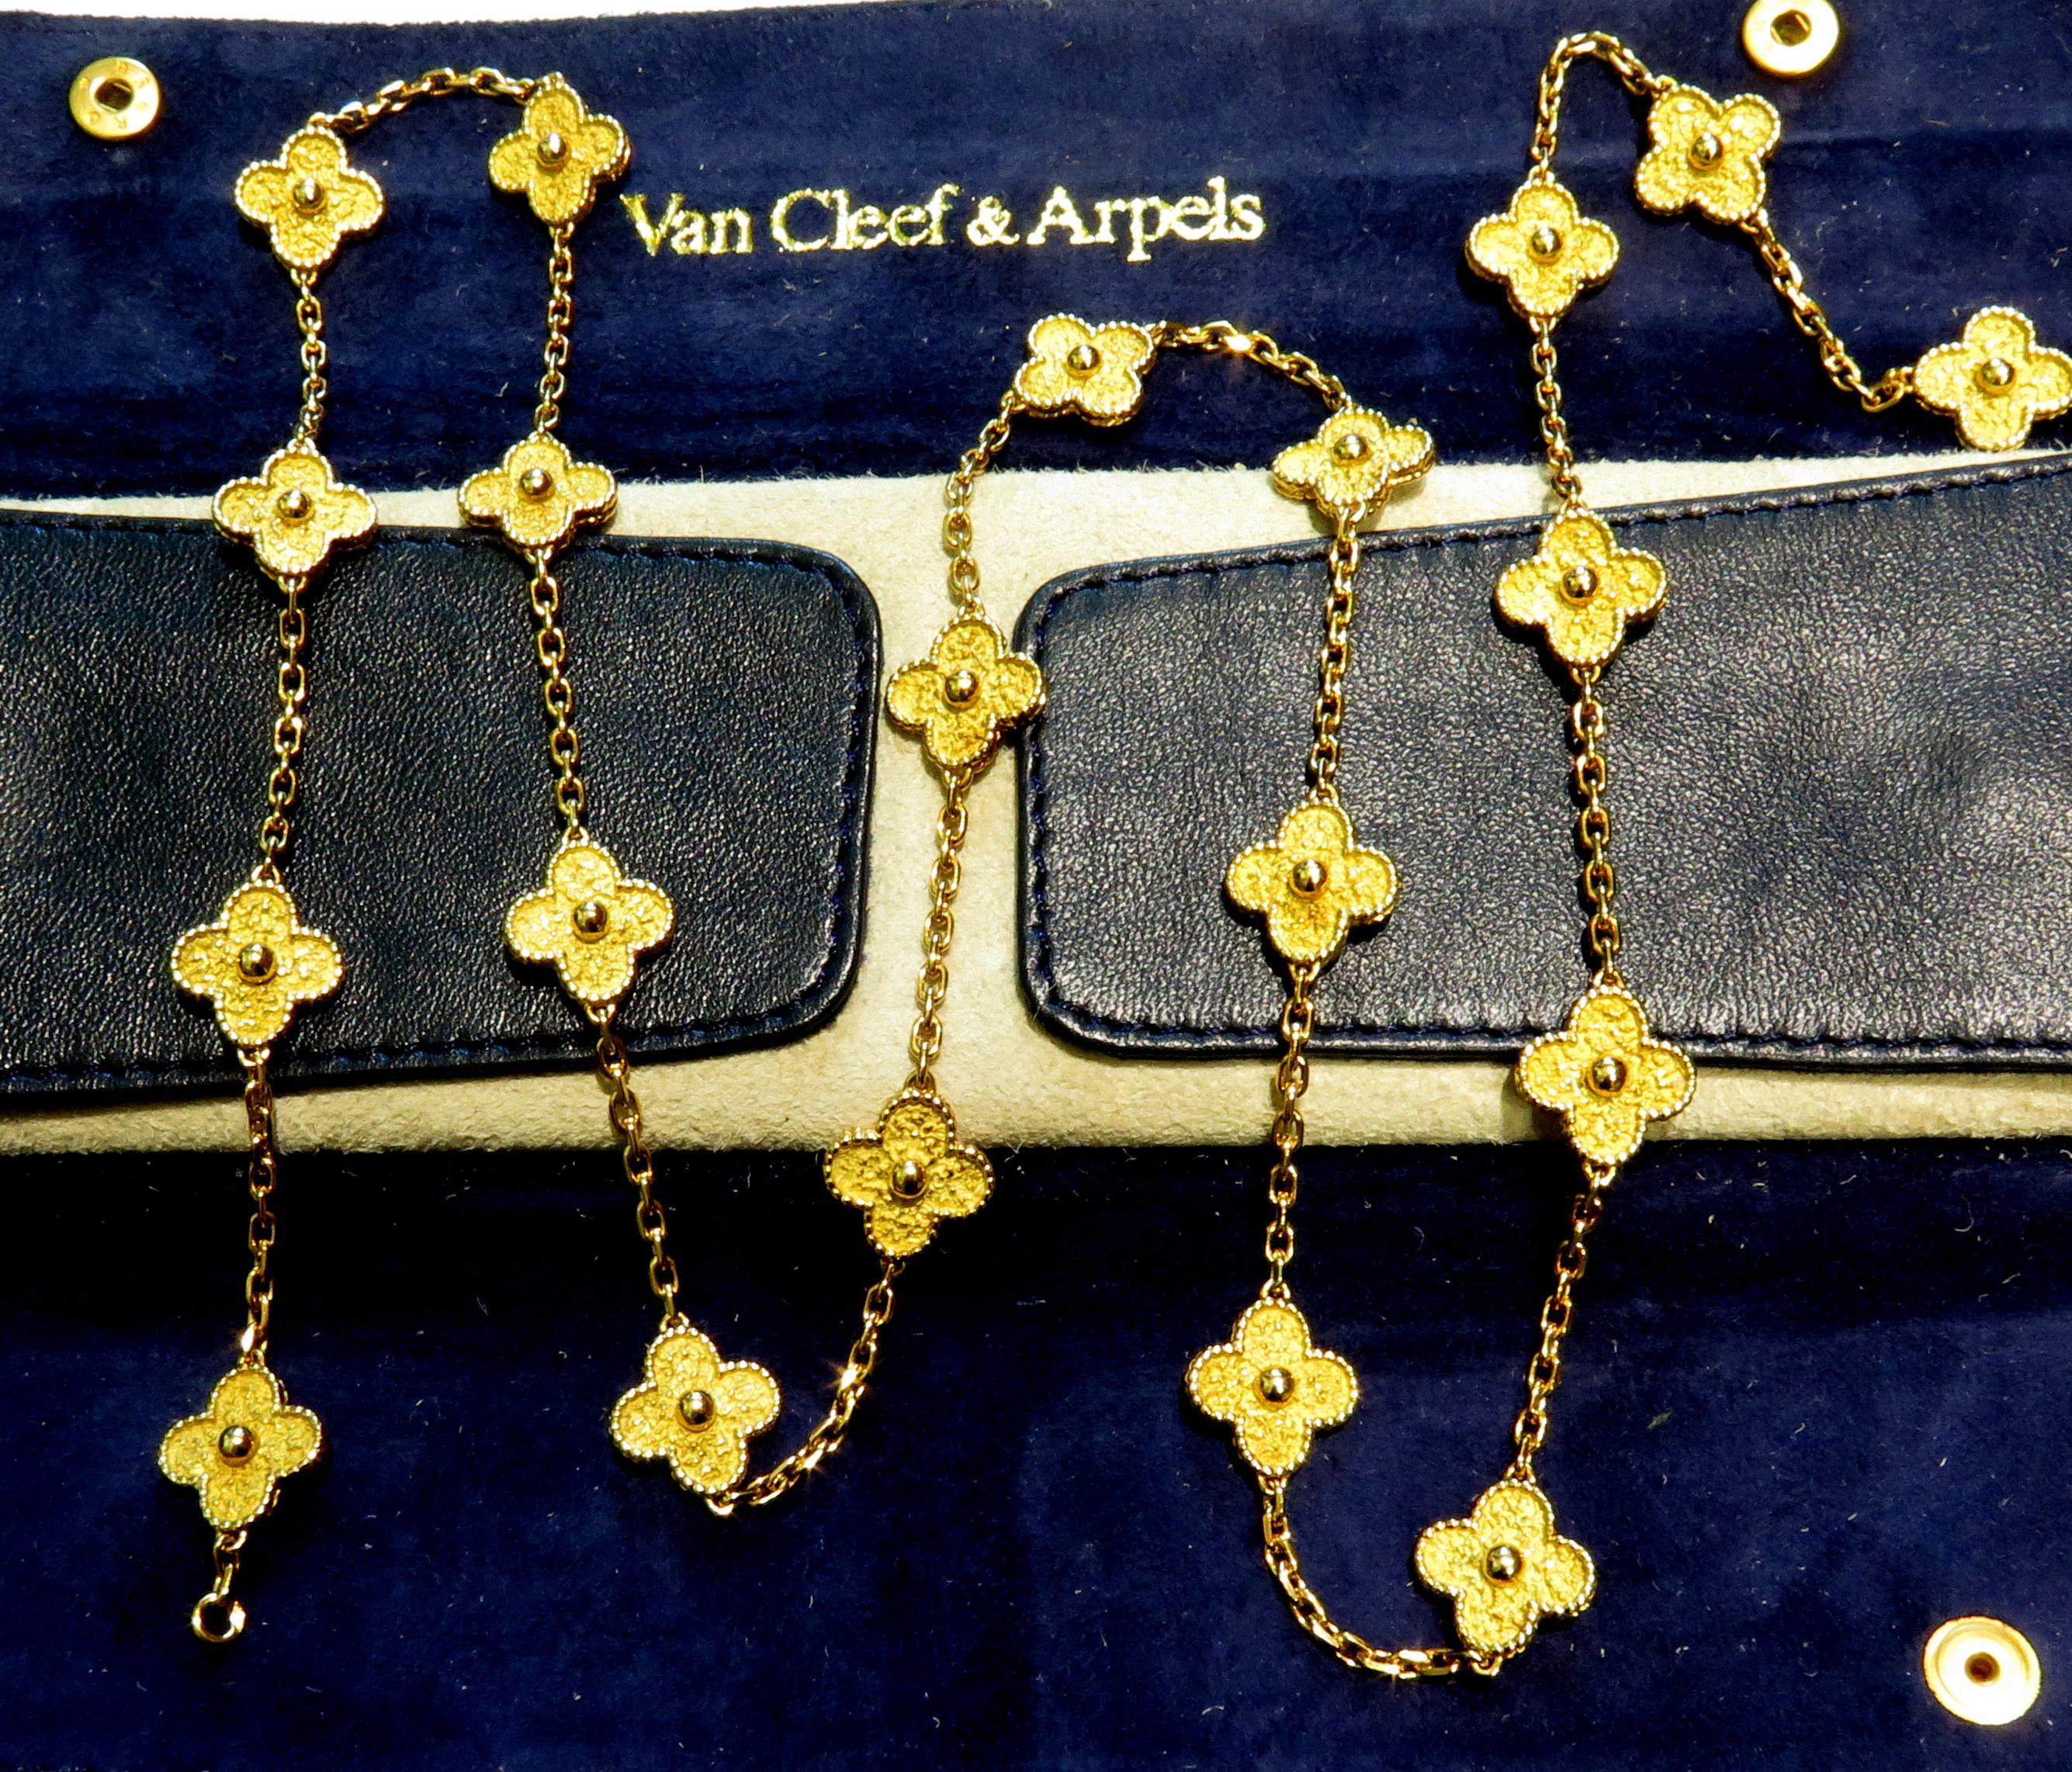 This stunning Alhambra necklace was purchased in 1970. It has 20 motifs in 18 karat yellow gold. This necklace comes with the original leather pouch.    
This Alhambra necklace measures 31 1/2 inch long
This Alhambra necklace weighs 60.1